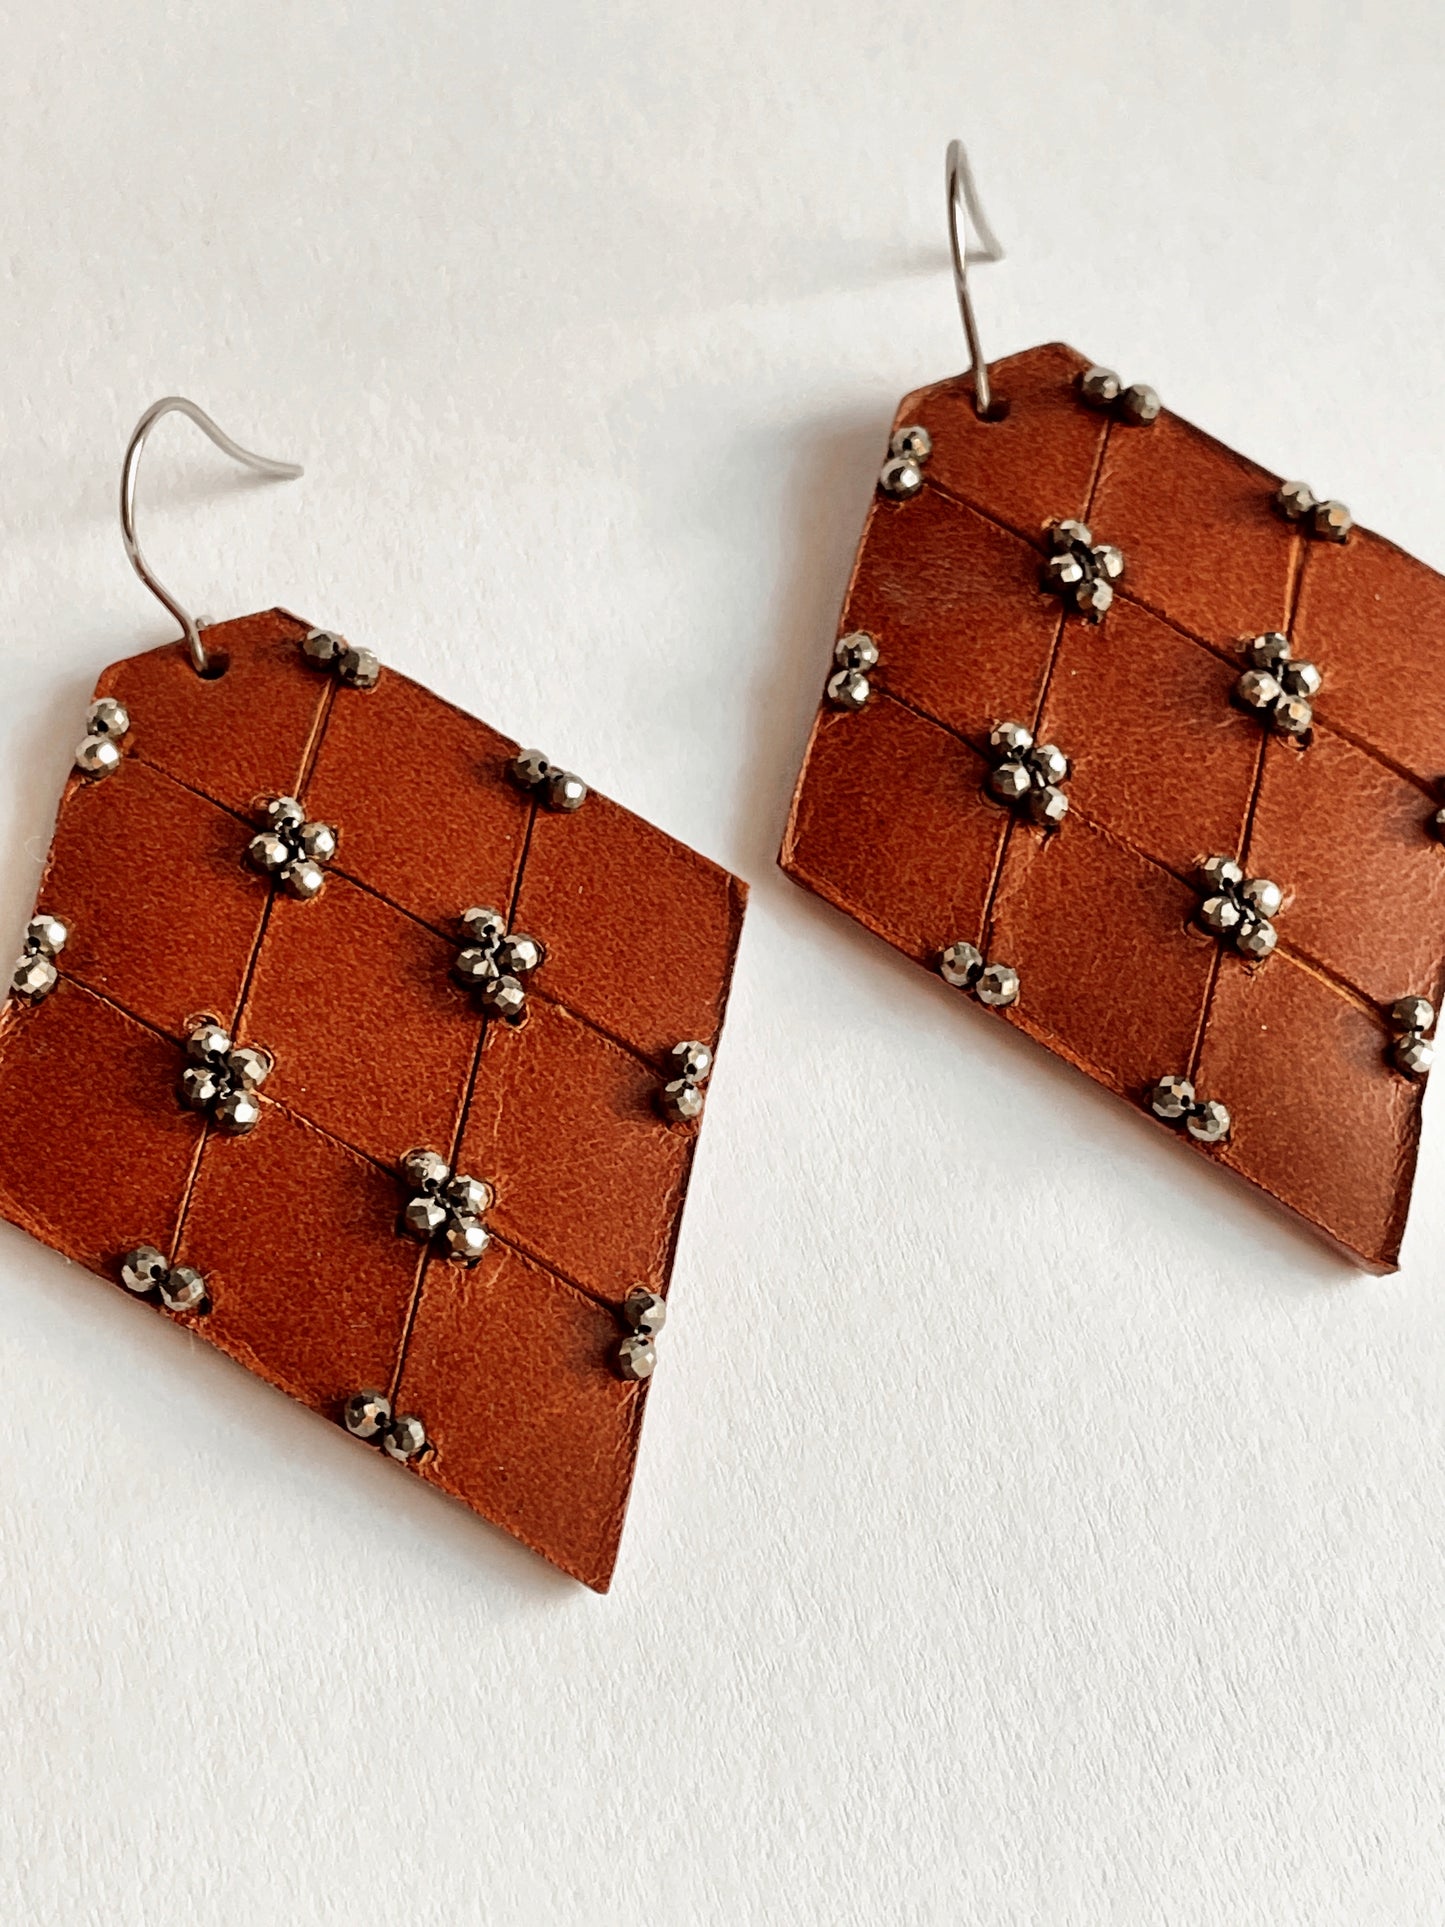 Medium QUILTED leather earrings